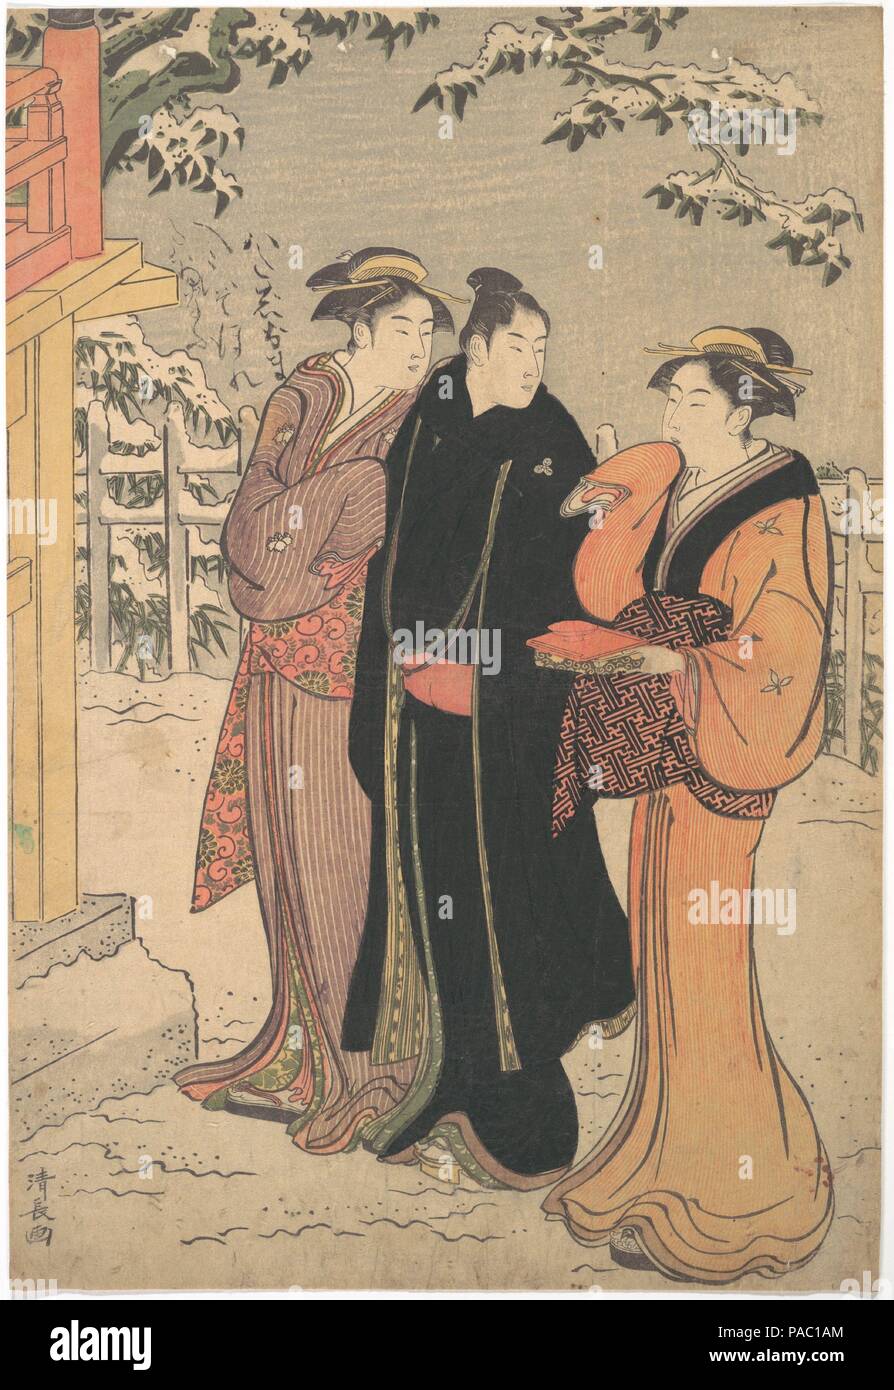 Man in a Black Haori (Coat) and Two Women Approaching a Temple. Artist: Torii Kiyonaga (Japanese, 1752-1815). Culture: Japan. Dimensions: H. 14 13/16 in. (37.6 cm); W. 10 1/16 in. (25.6 cm).  From the Edo period to the present, Sensoji Temple at Asakusa has been the representative temple of Tokyo's shitamachi (merchant-class neighborhoods). Originally built in the Nara period, Sensoji was made resplendent in Edo times. The citizens of Edo visit the temple at the end of the year to buy charms and pray for prosperity or a safe home. Museum: Metropolitan Museum of Art, New York, USA. Stock Photo